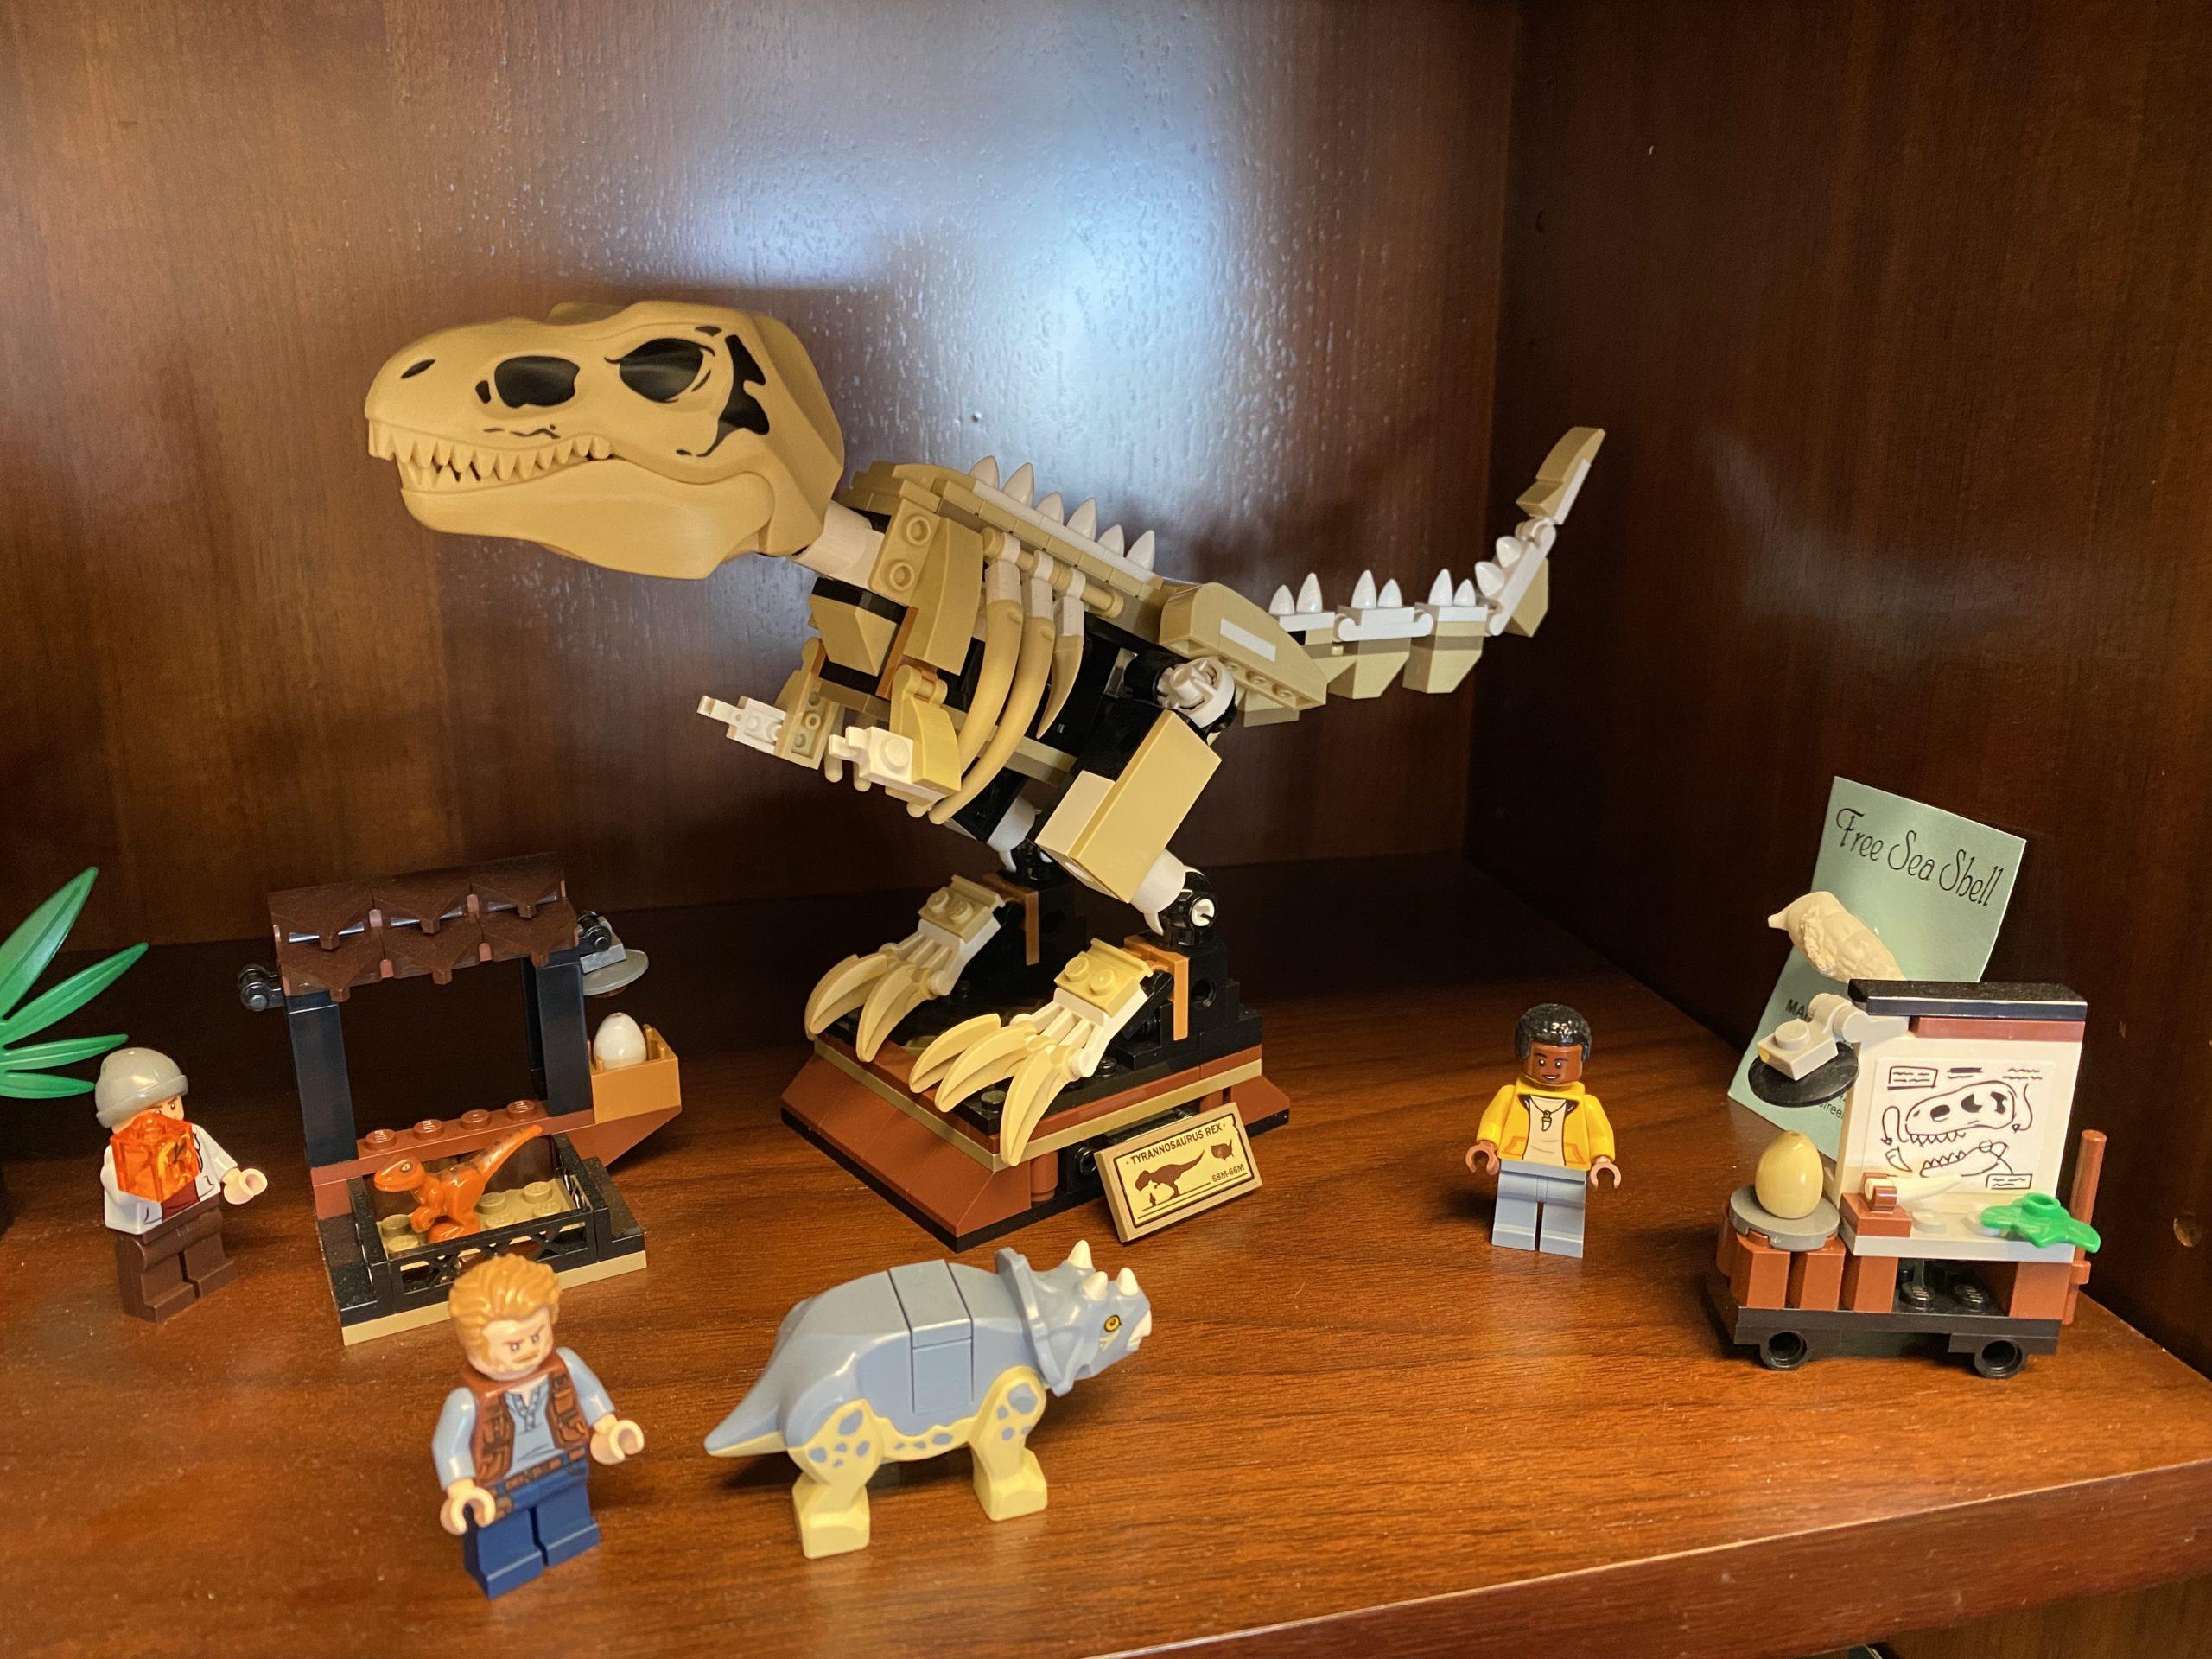 A Lego set from Jurassic World that includes a T-Rex skeleton, an educational display, and a baby triceratops.